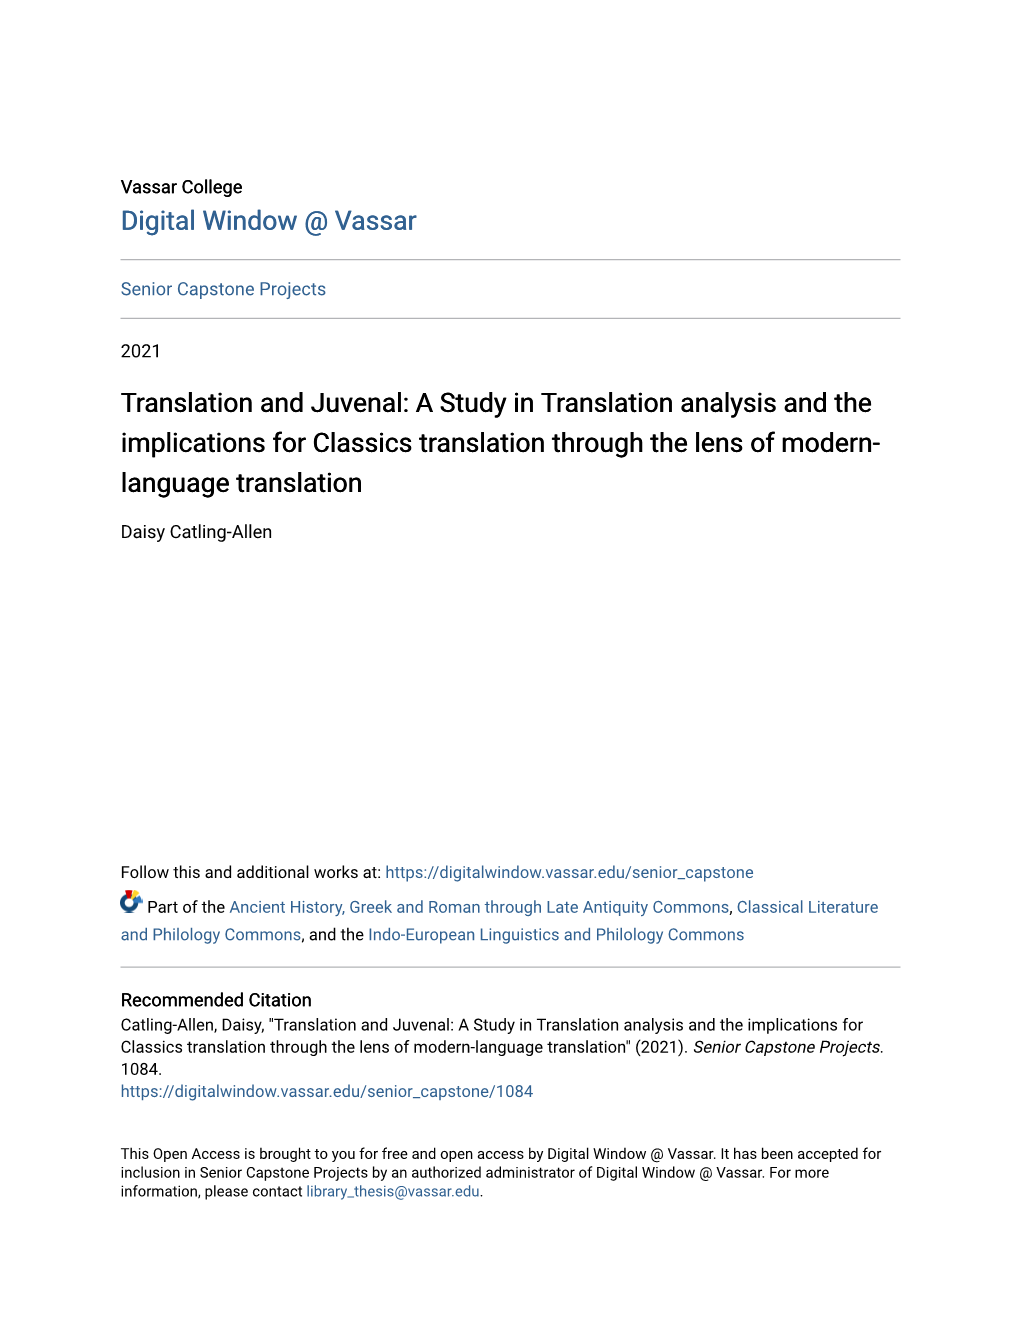 Translation and Juvenal: a Study in Translation Analysis and the Implications for Classics Translation Through the Lens of Modern- Language Translation